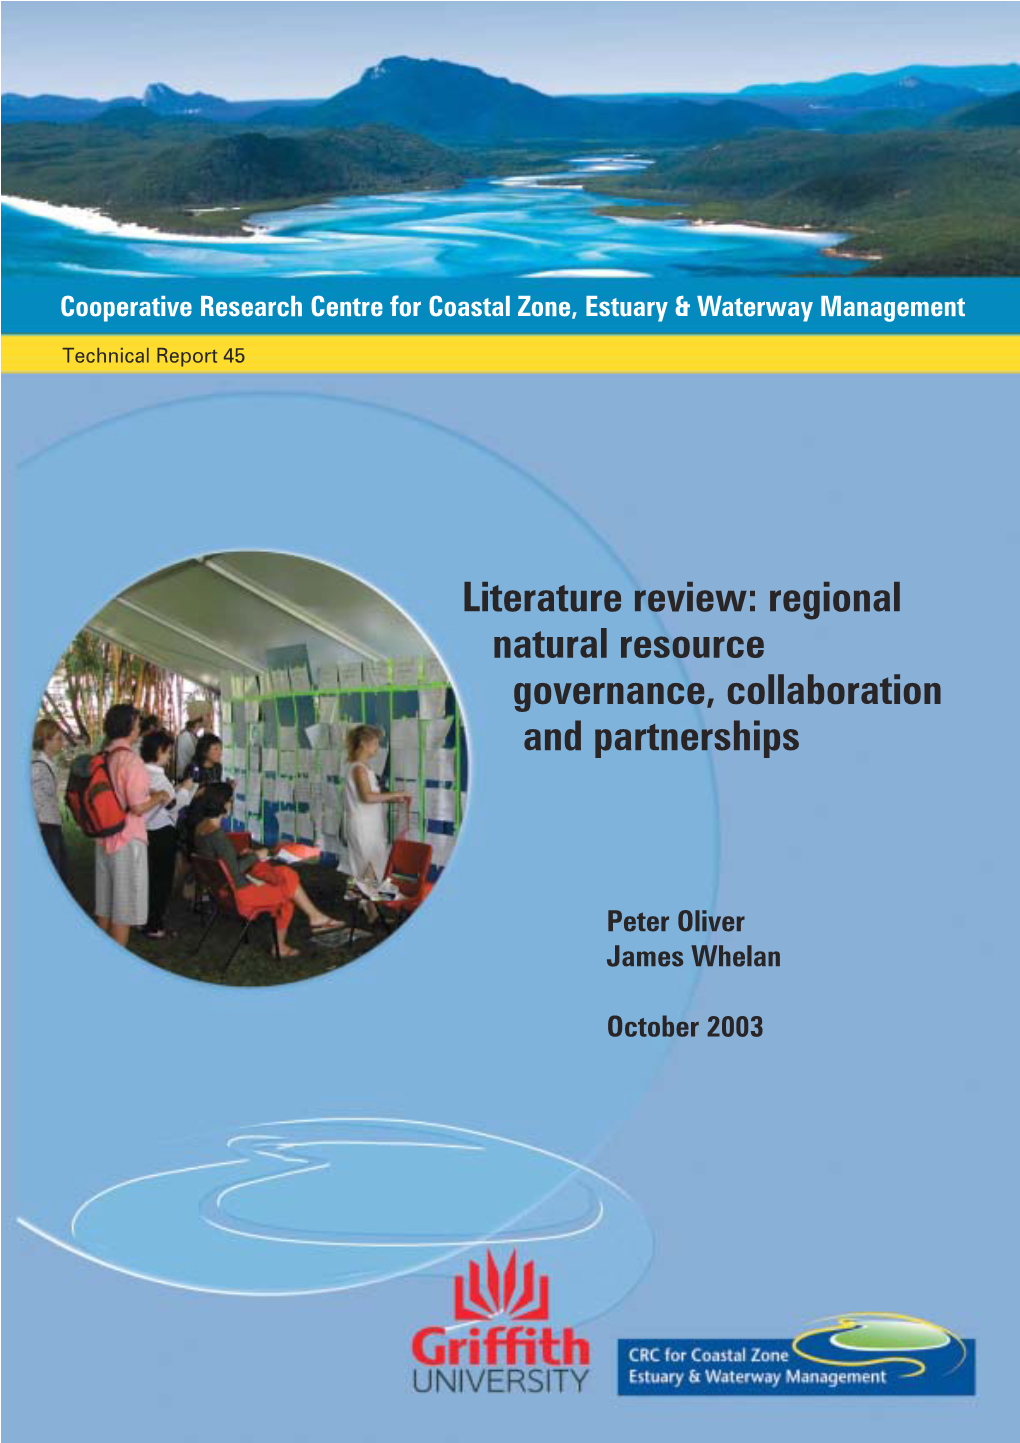 Regional Natural Resource Governance, Collaboration and Partnerships